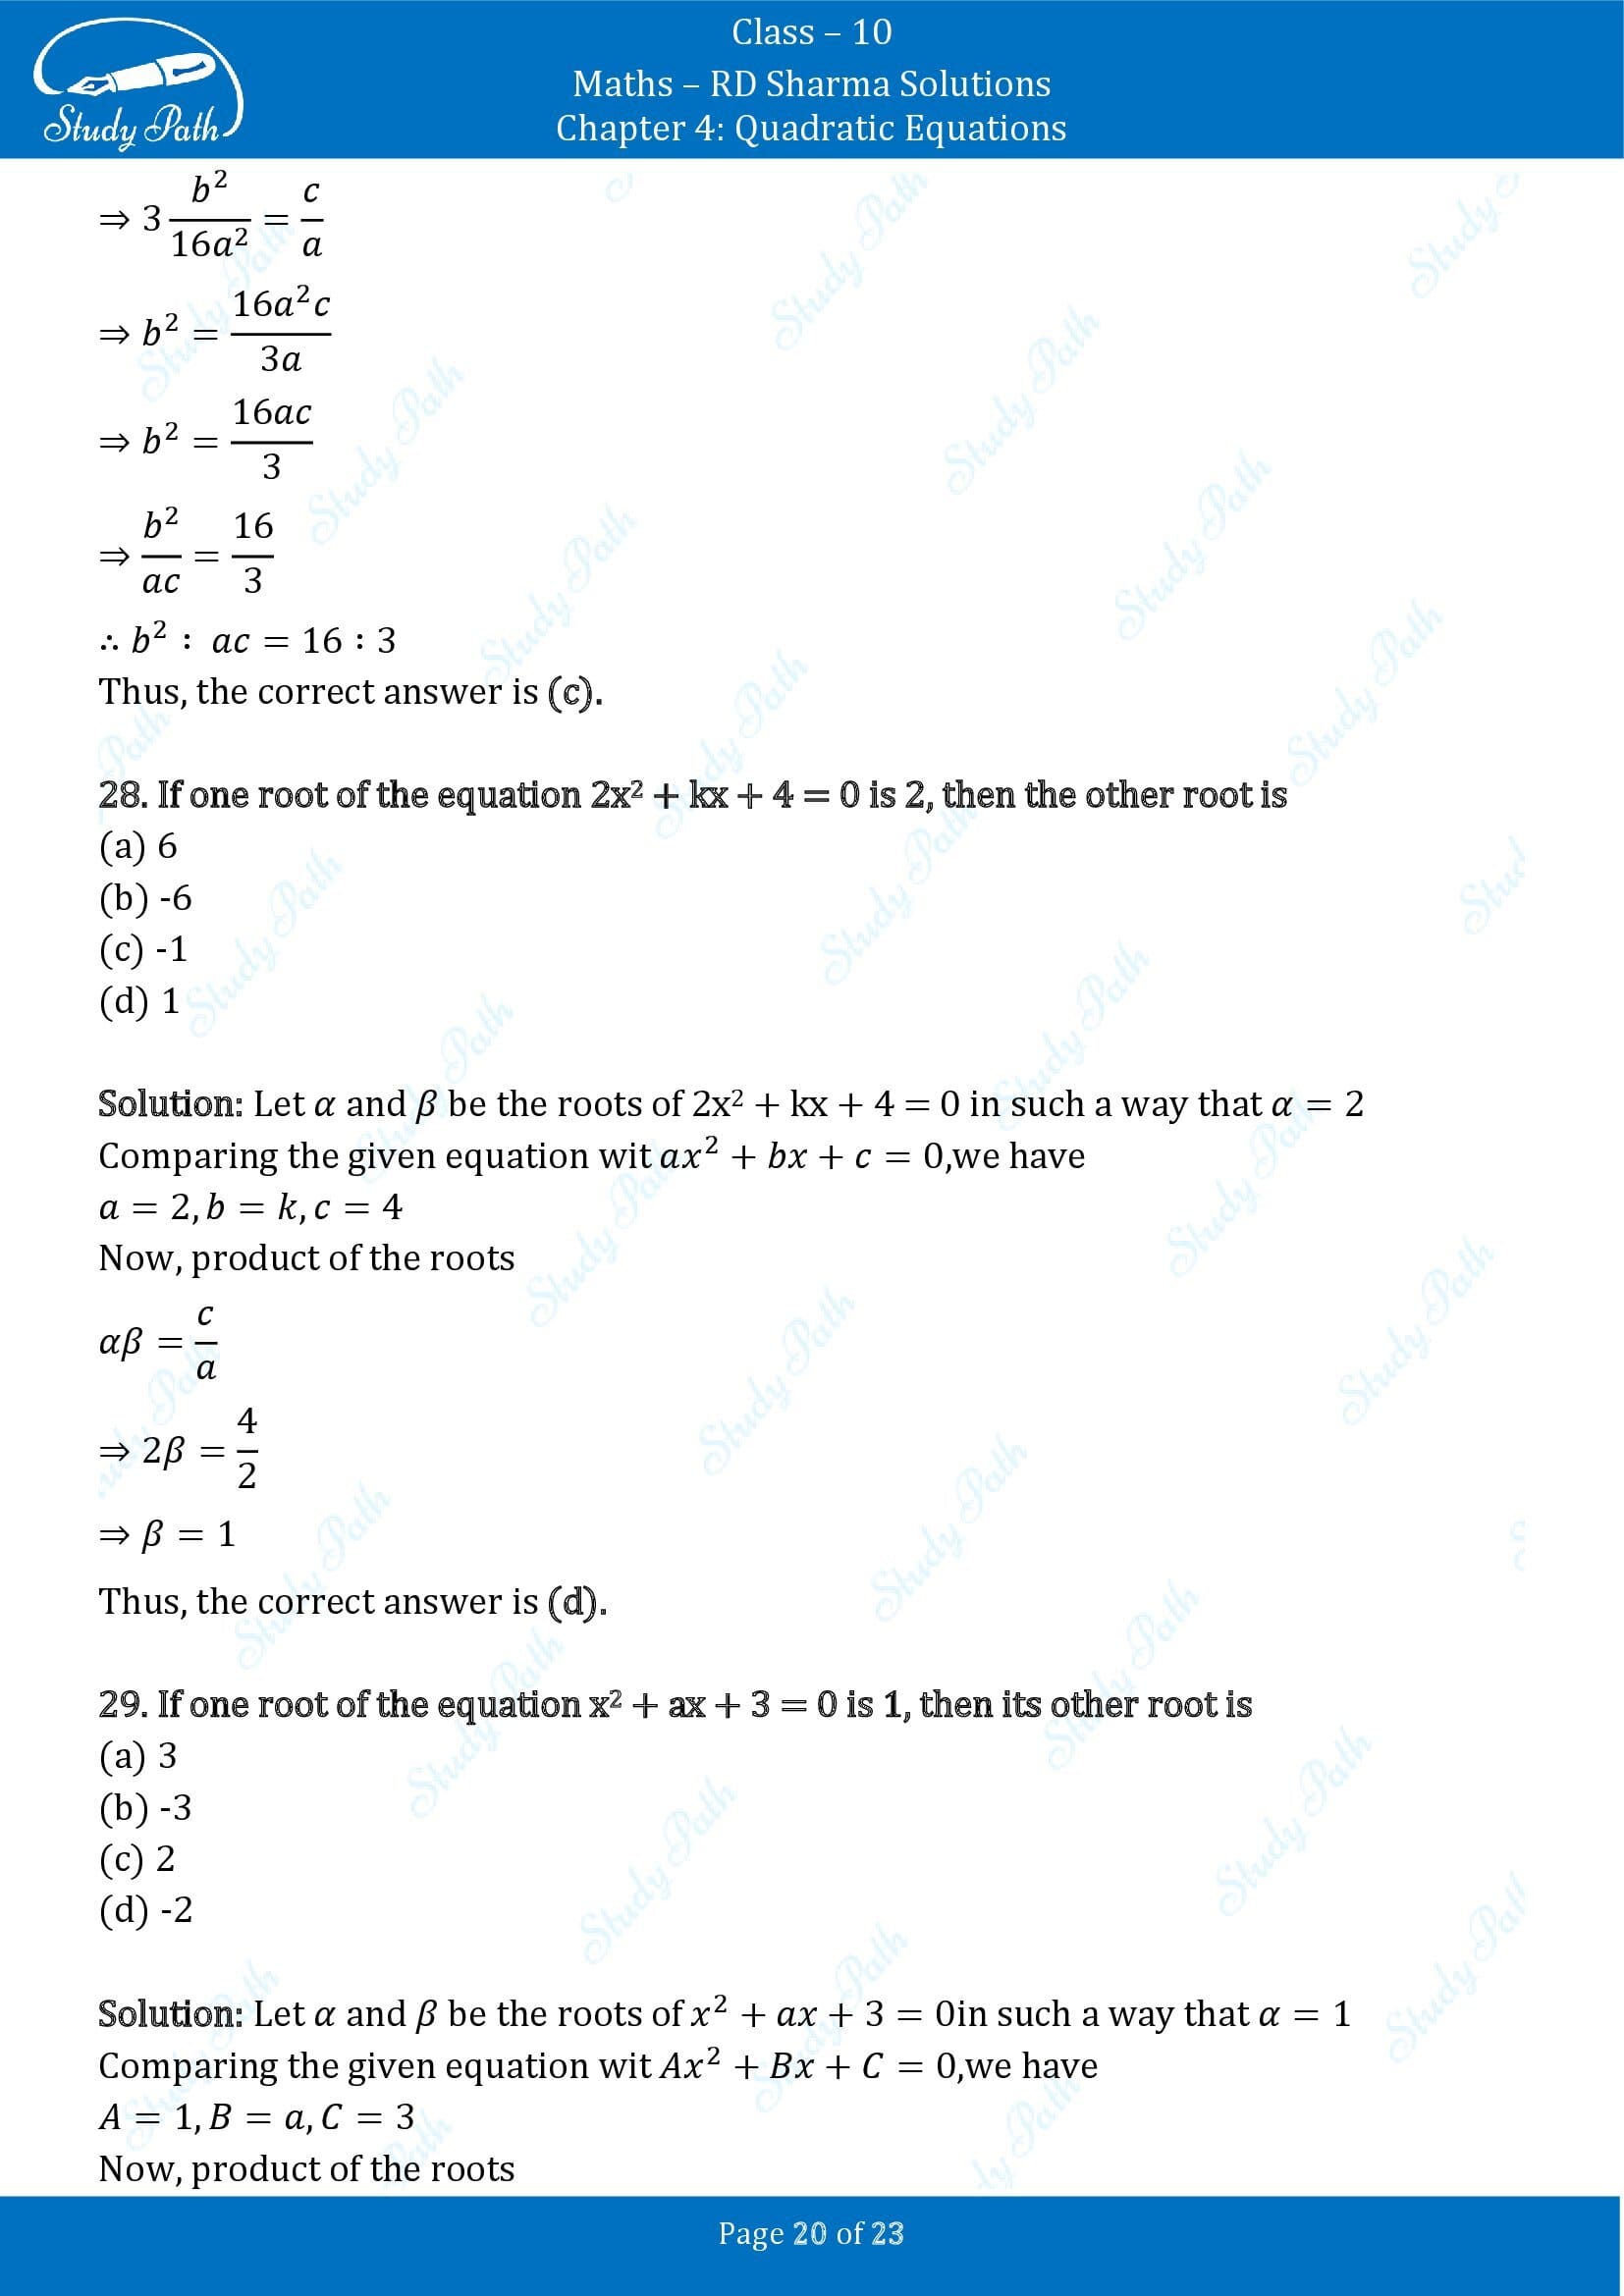 RD Sharma Solutions Class 10 Chapter 4 Quadratic Equations Multiple Choice Questions MCQs 00020